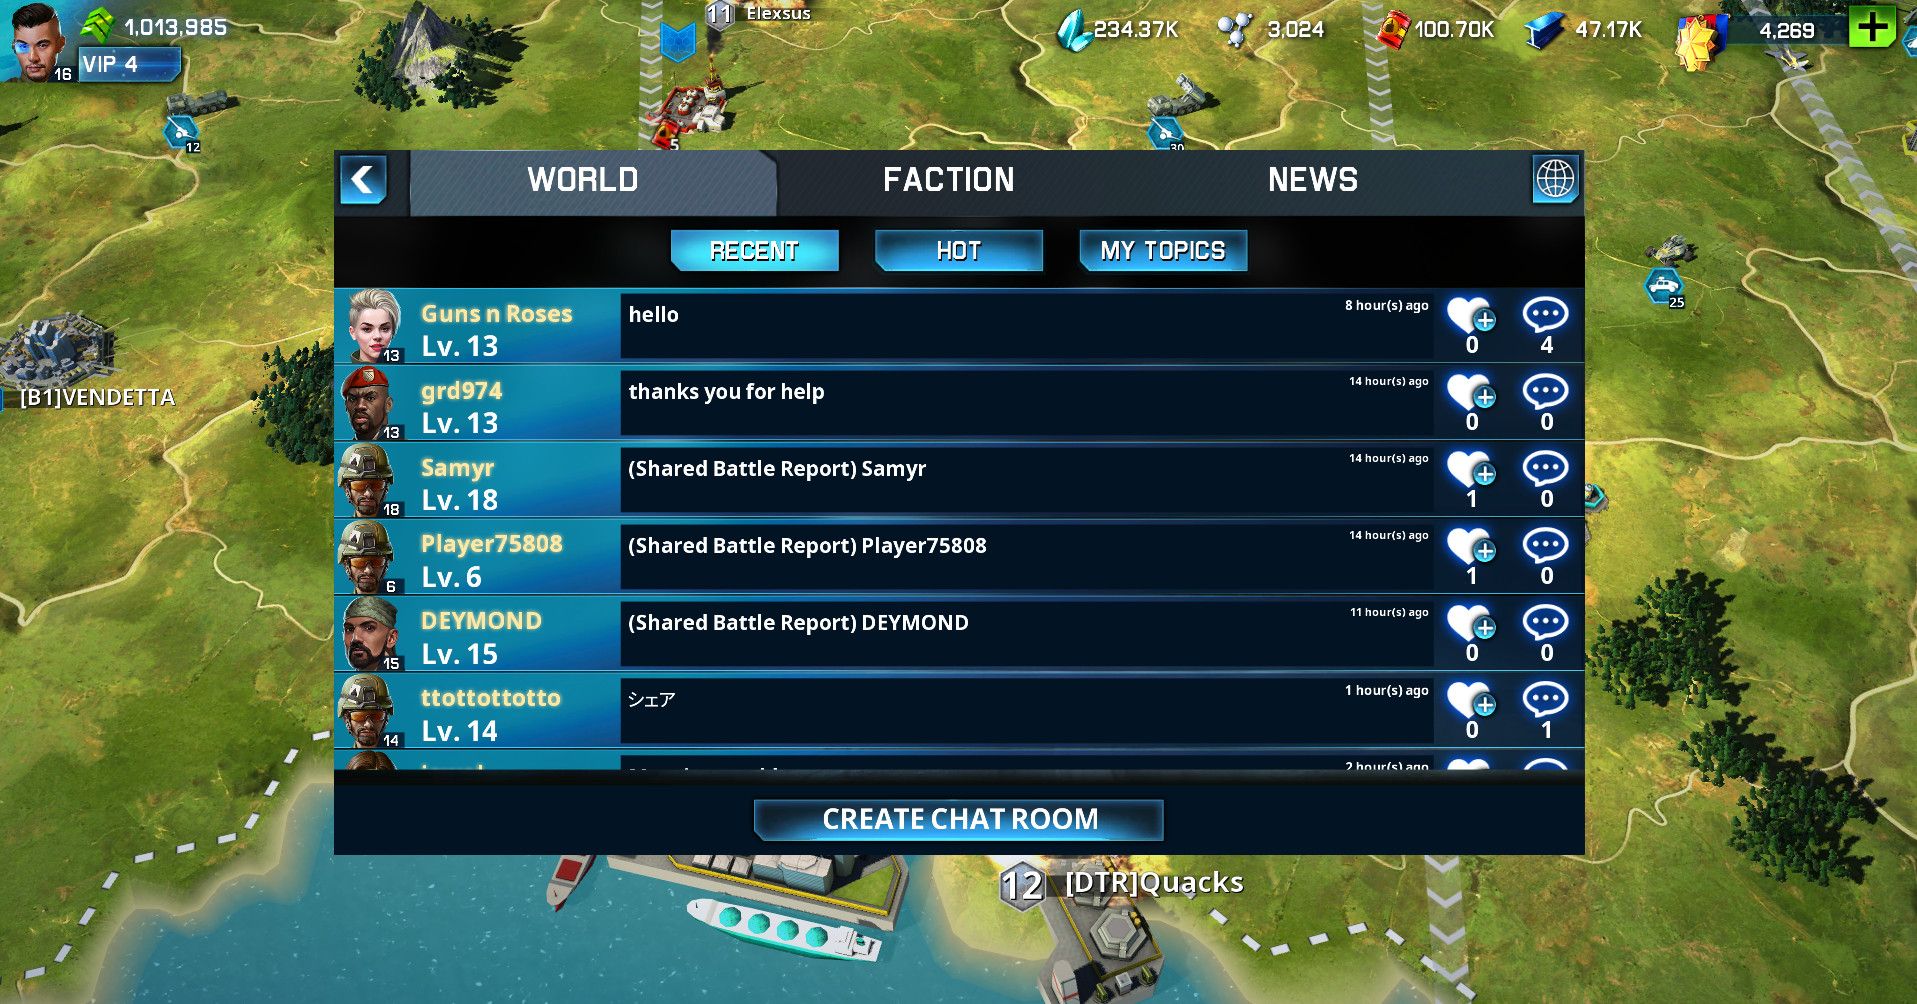 war planet online global conquest attacking cities